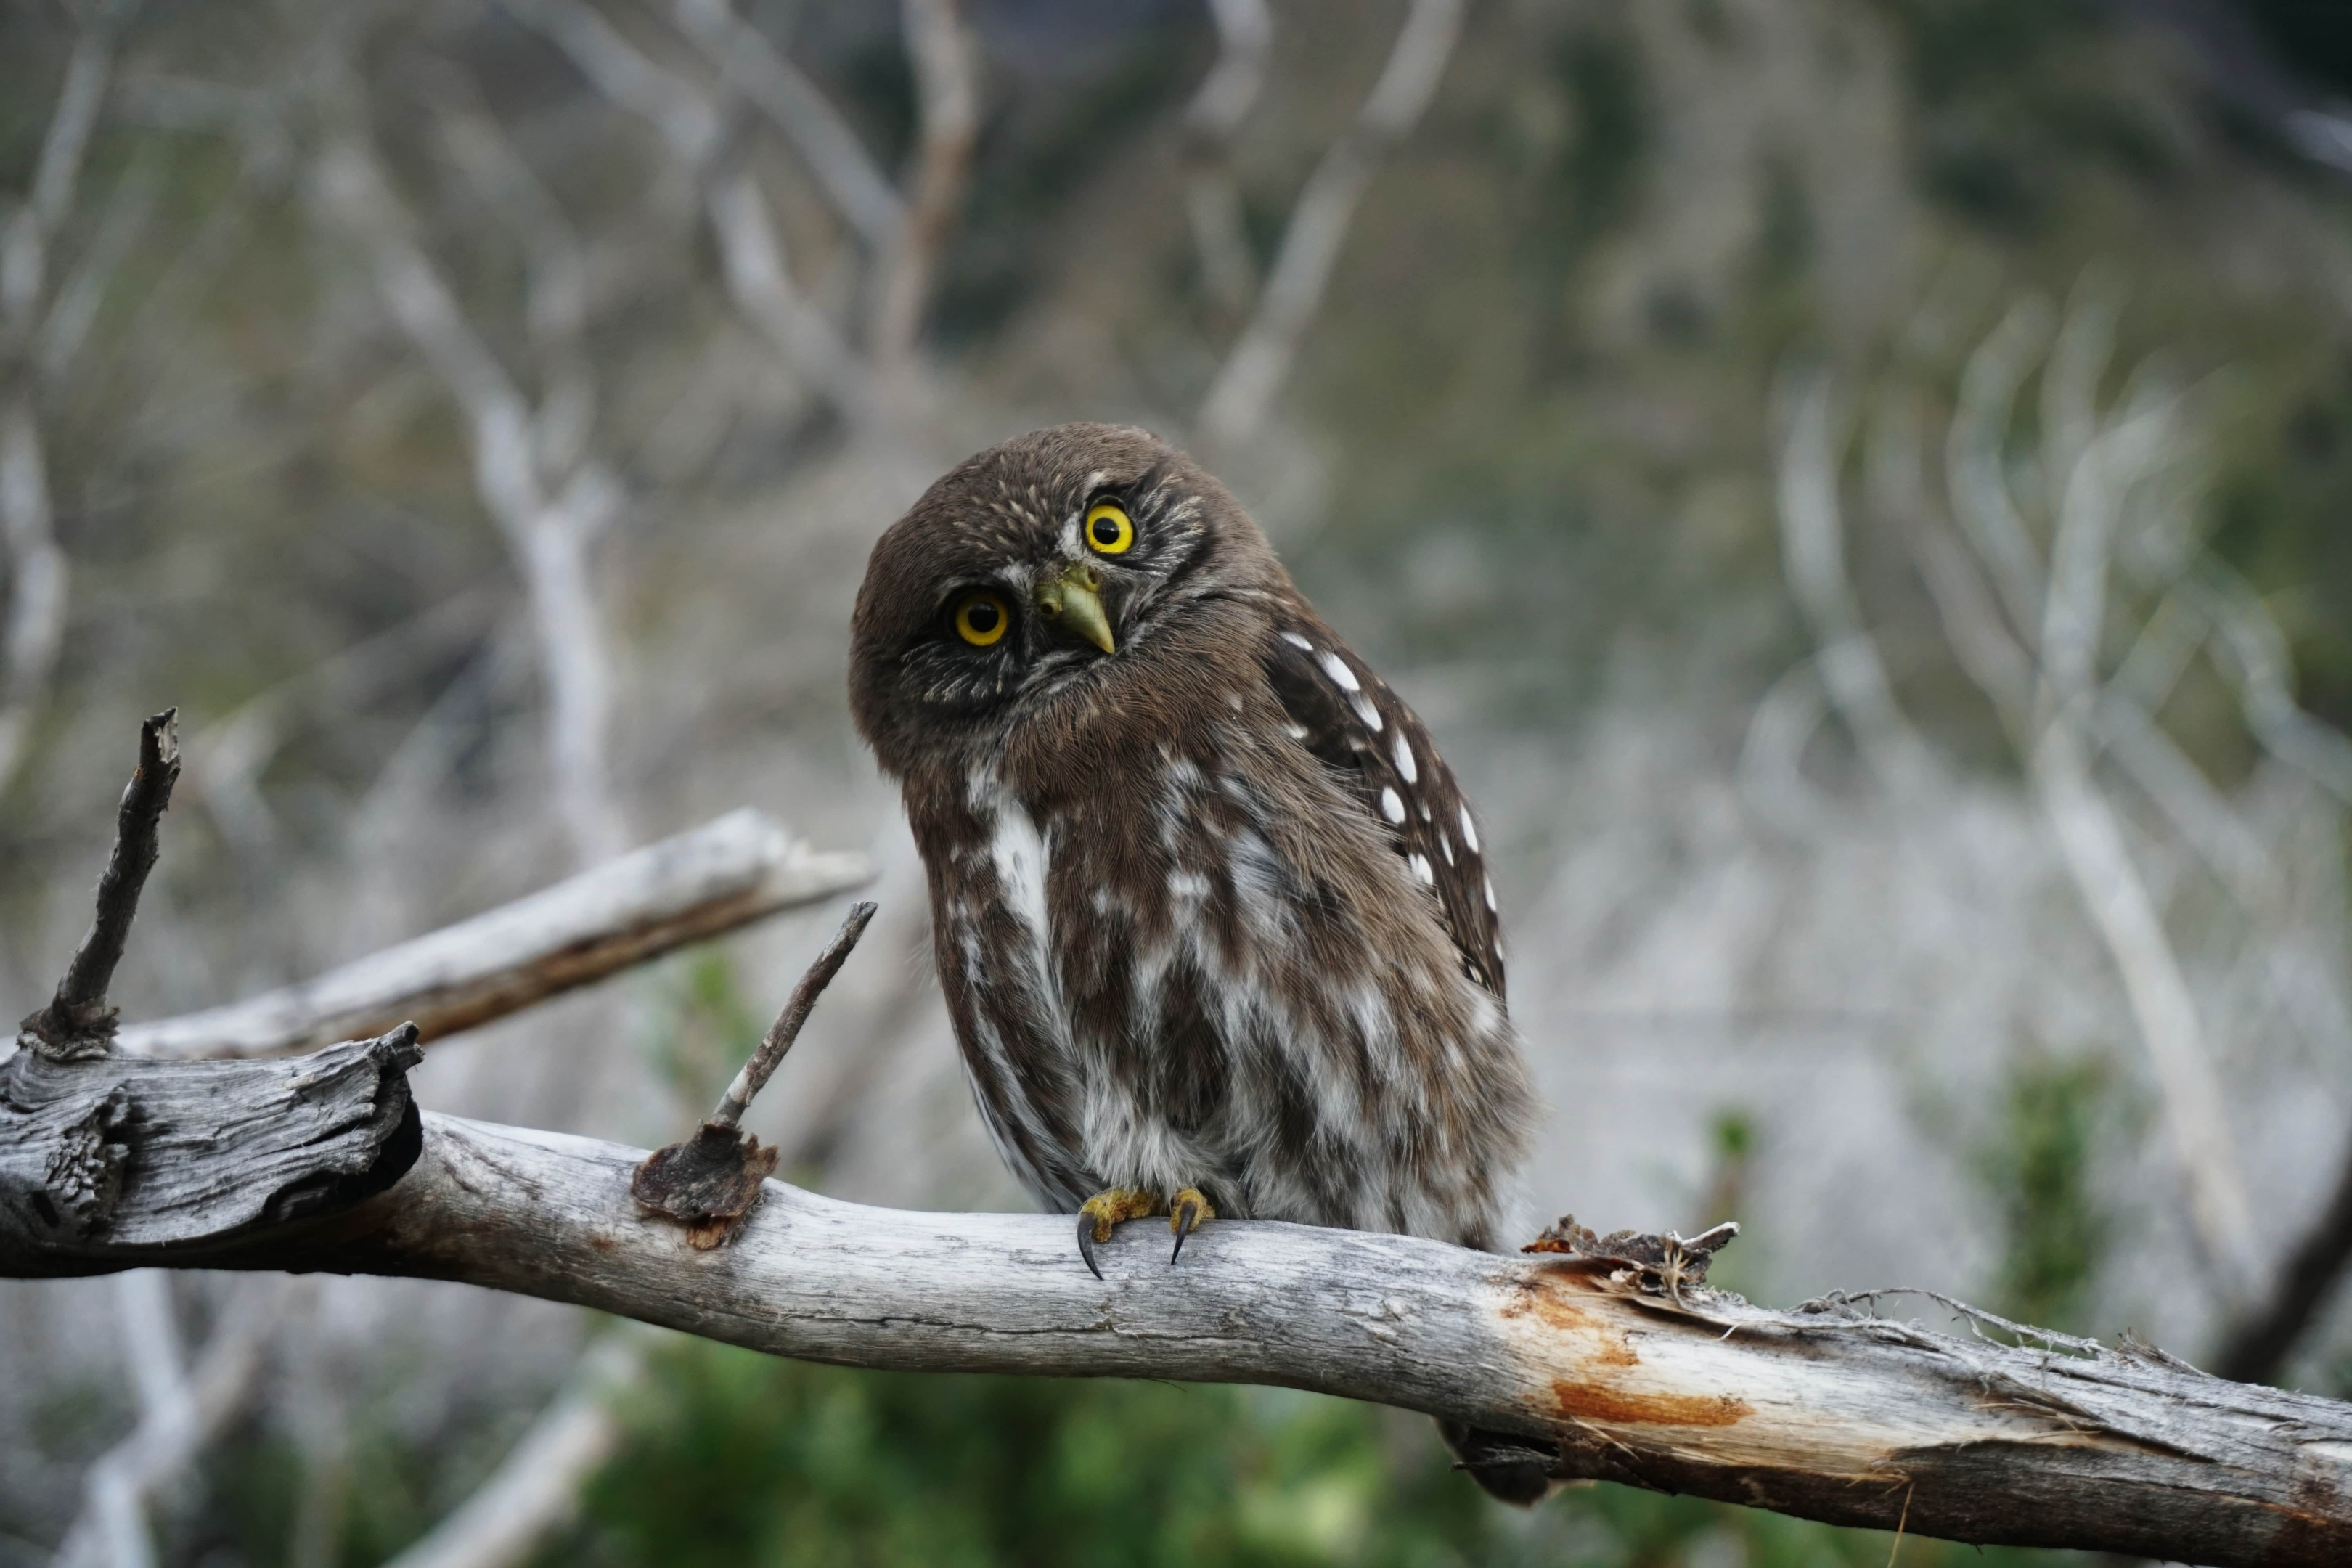 Symbolic Significance of Different Owl Species in Spiritual Beliefs